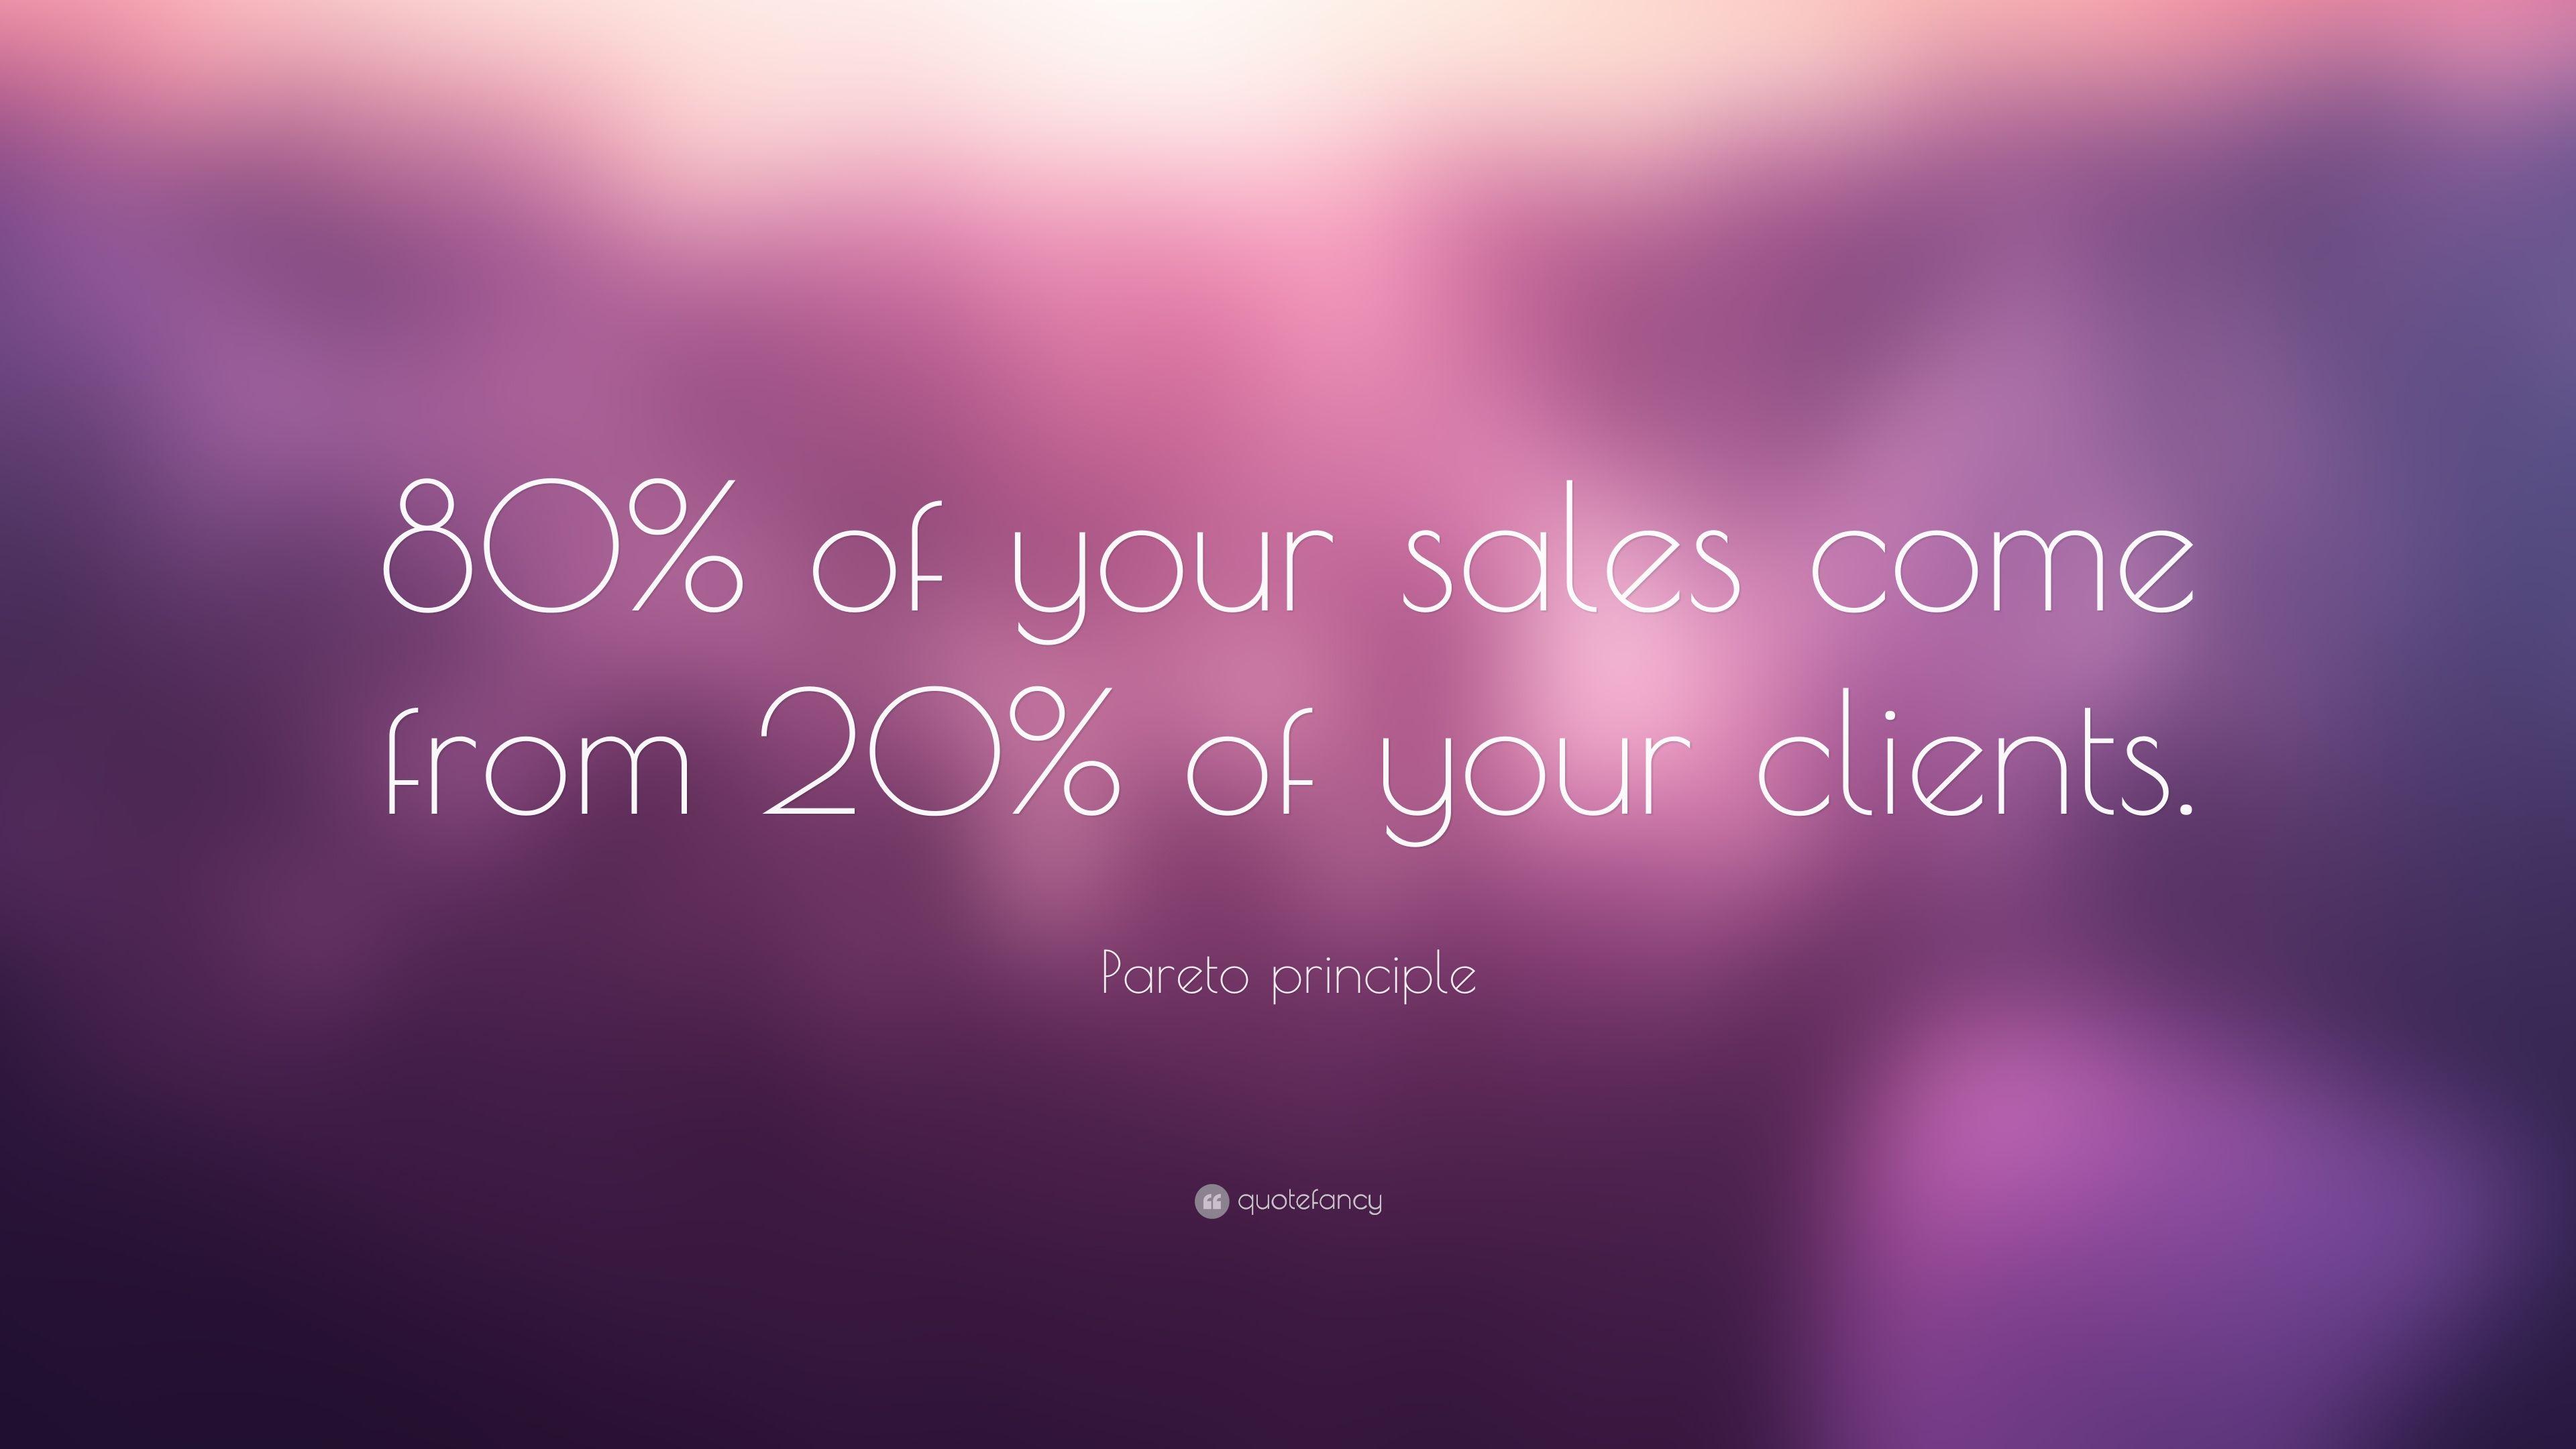 Pareto principle Quote: “80% of your sales come from 20% of your